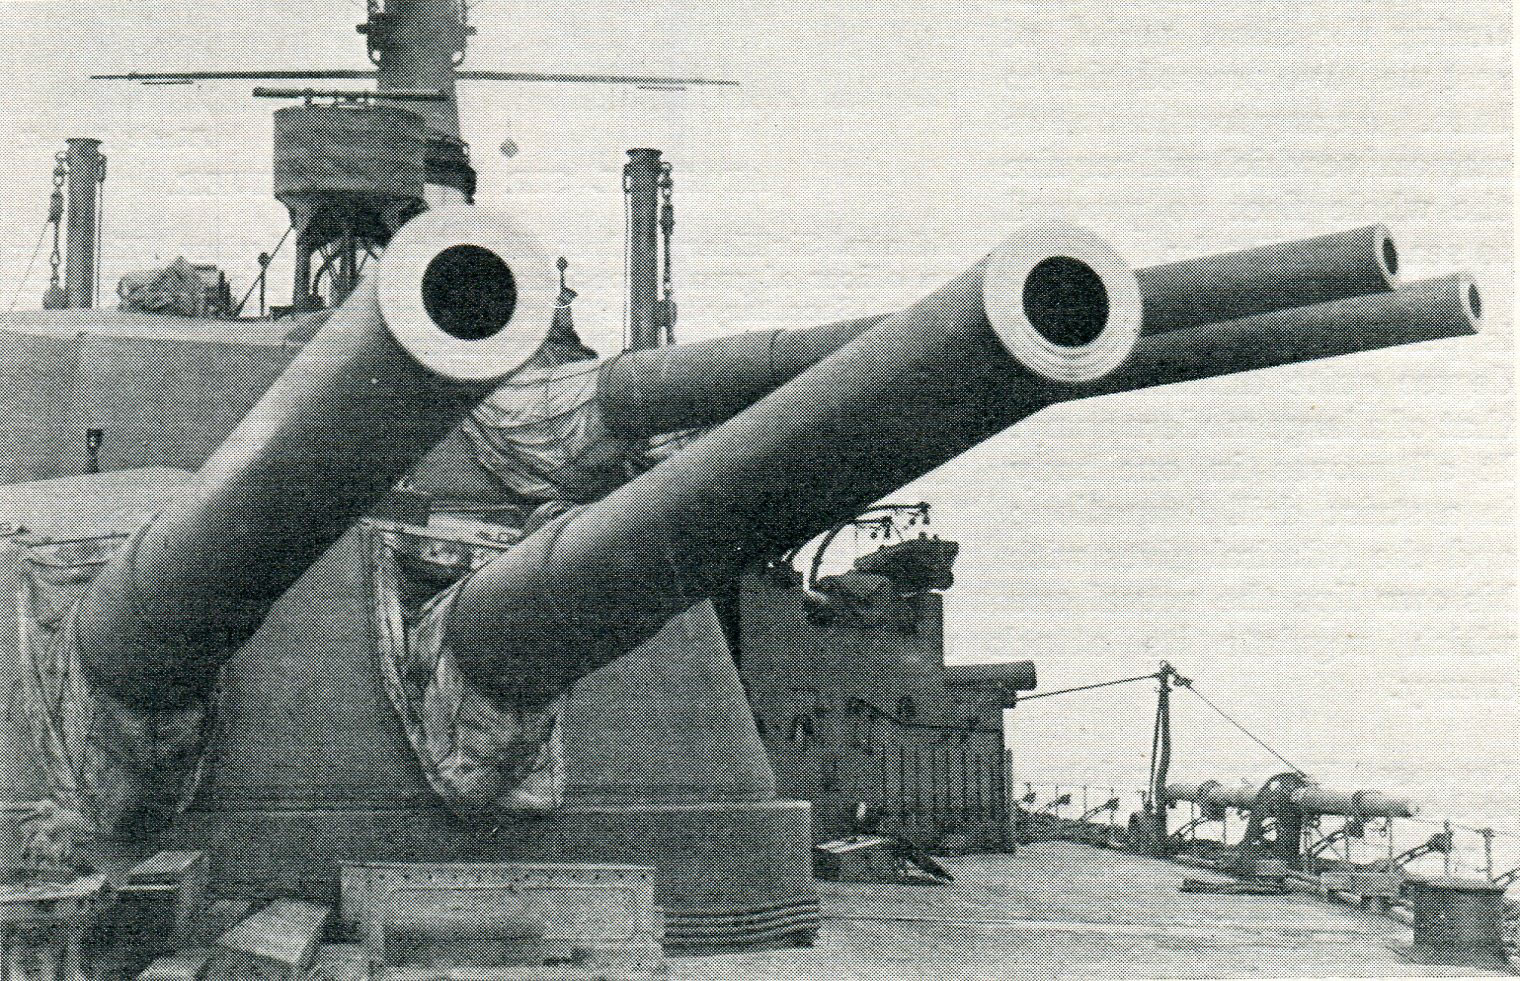 13.5 inch guns of the British Battleship HMS Ajax: Ajax fought at the Battle of Jutland on 31st May 1916 in the 2nd Battle Squadron commanded by Vice Admiral Sir Thomas Jerram